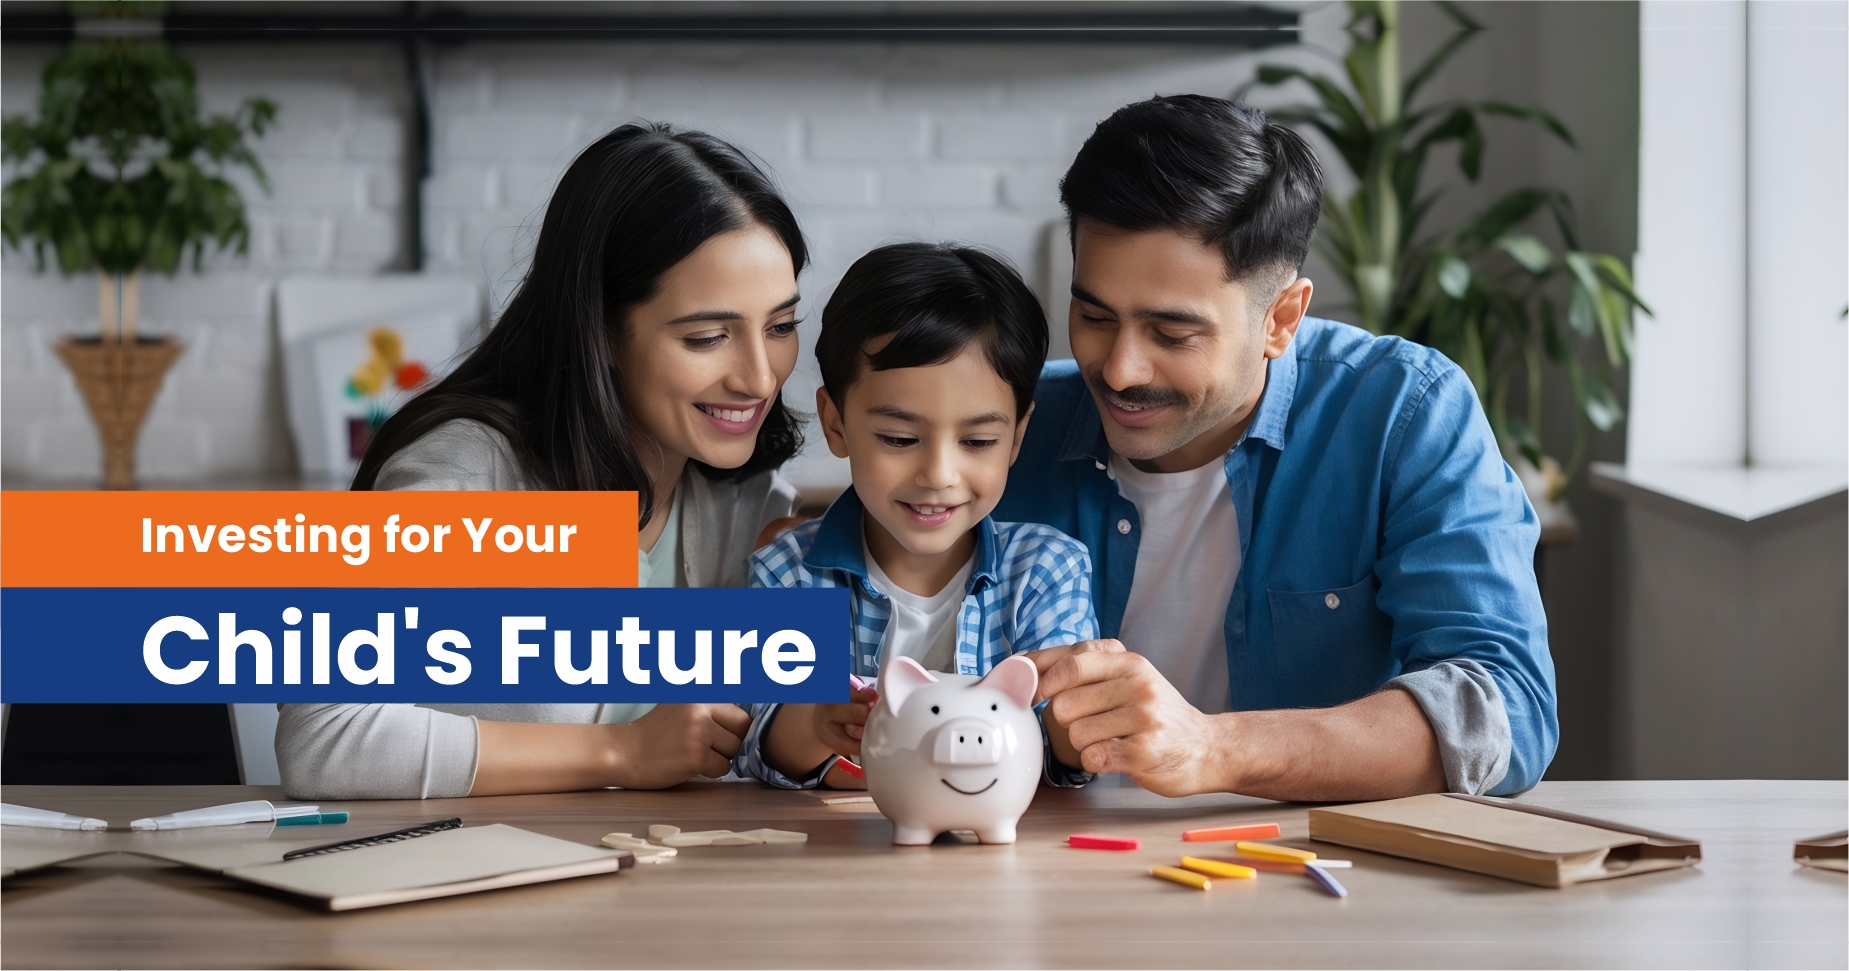 Investing for Your Child's Future